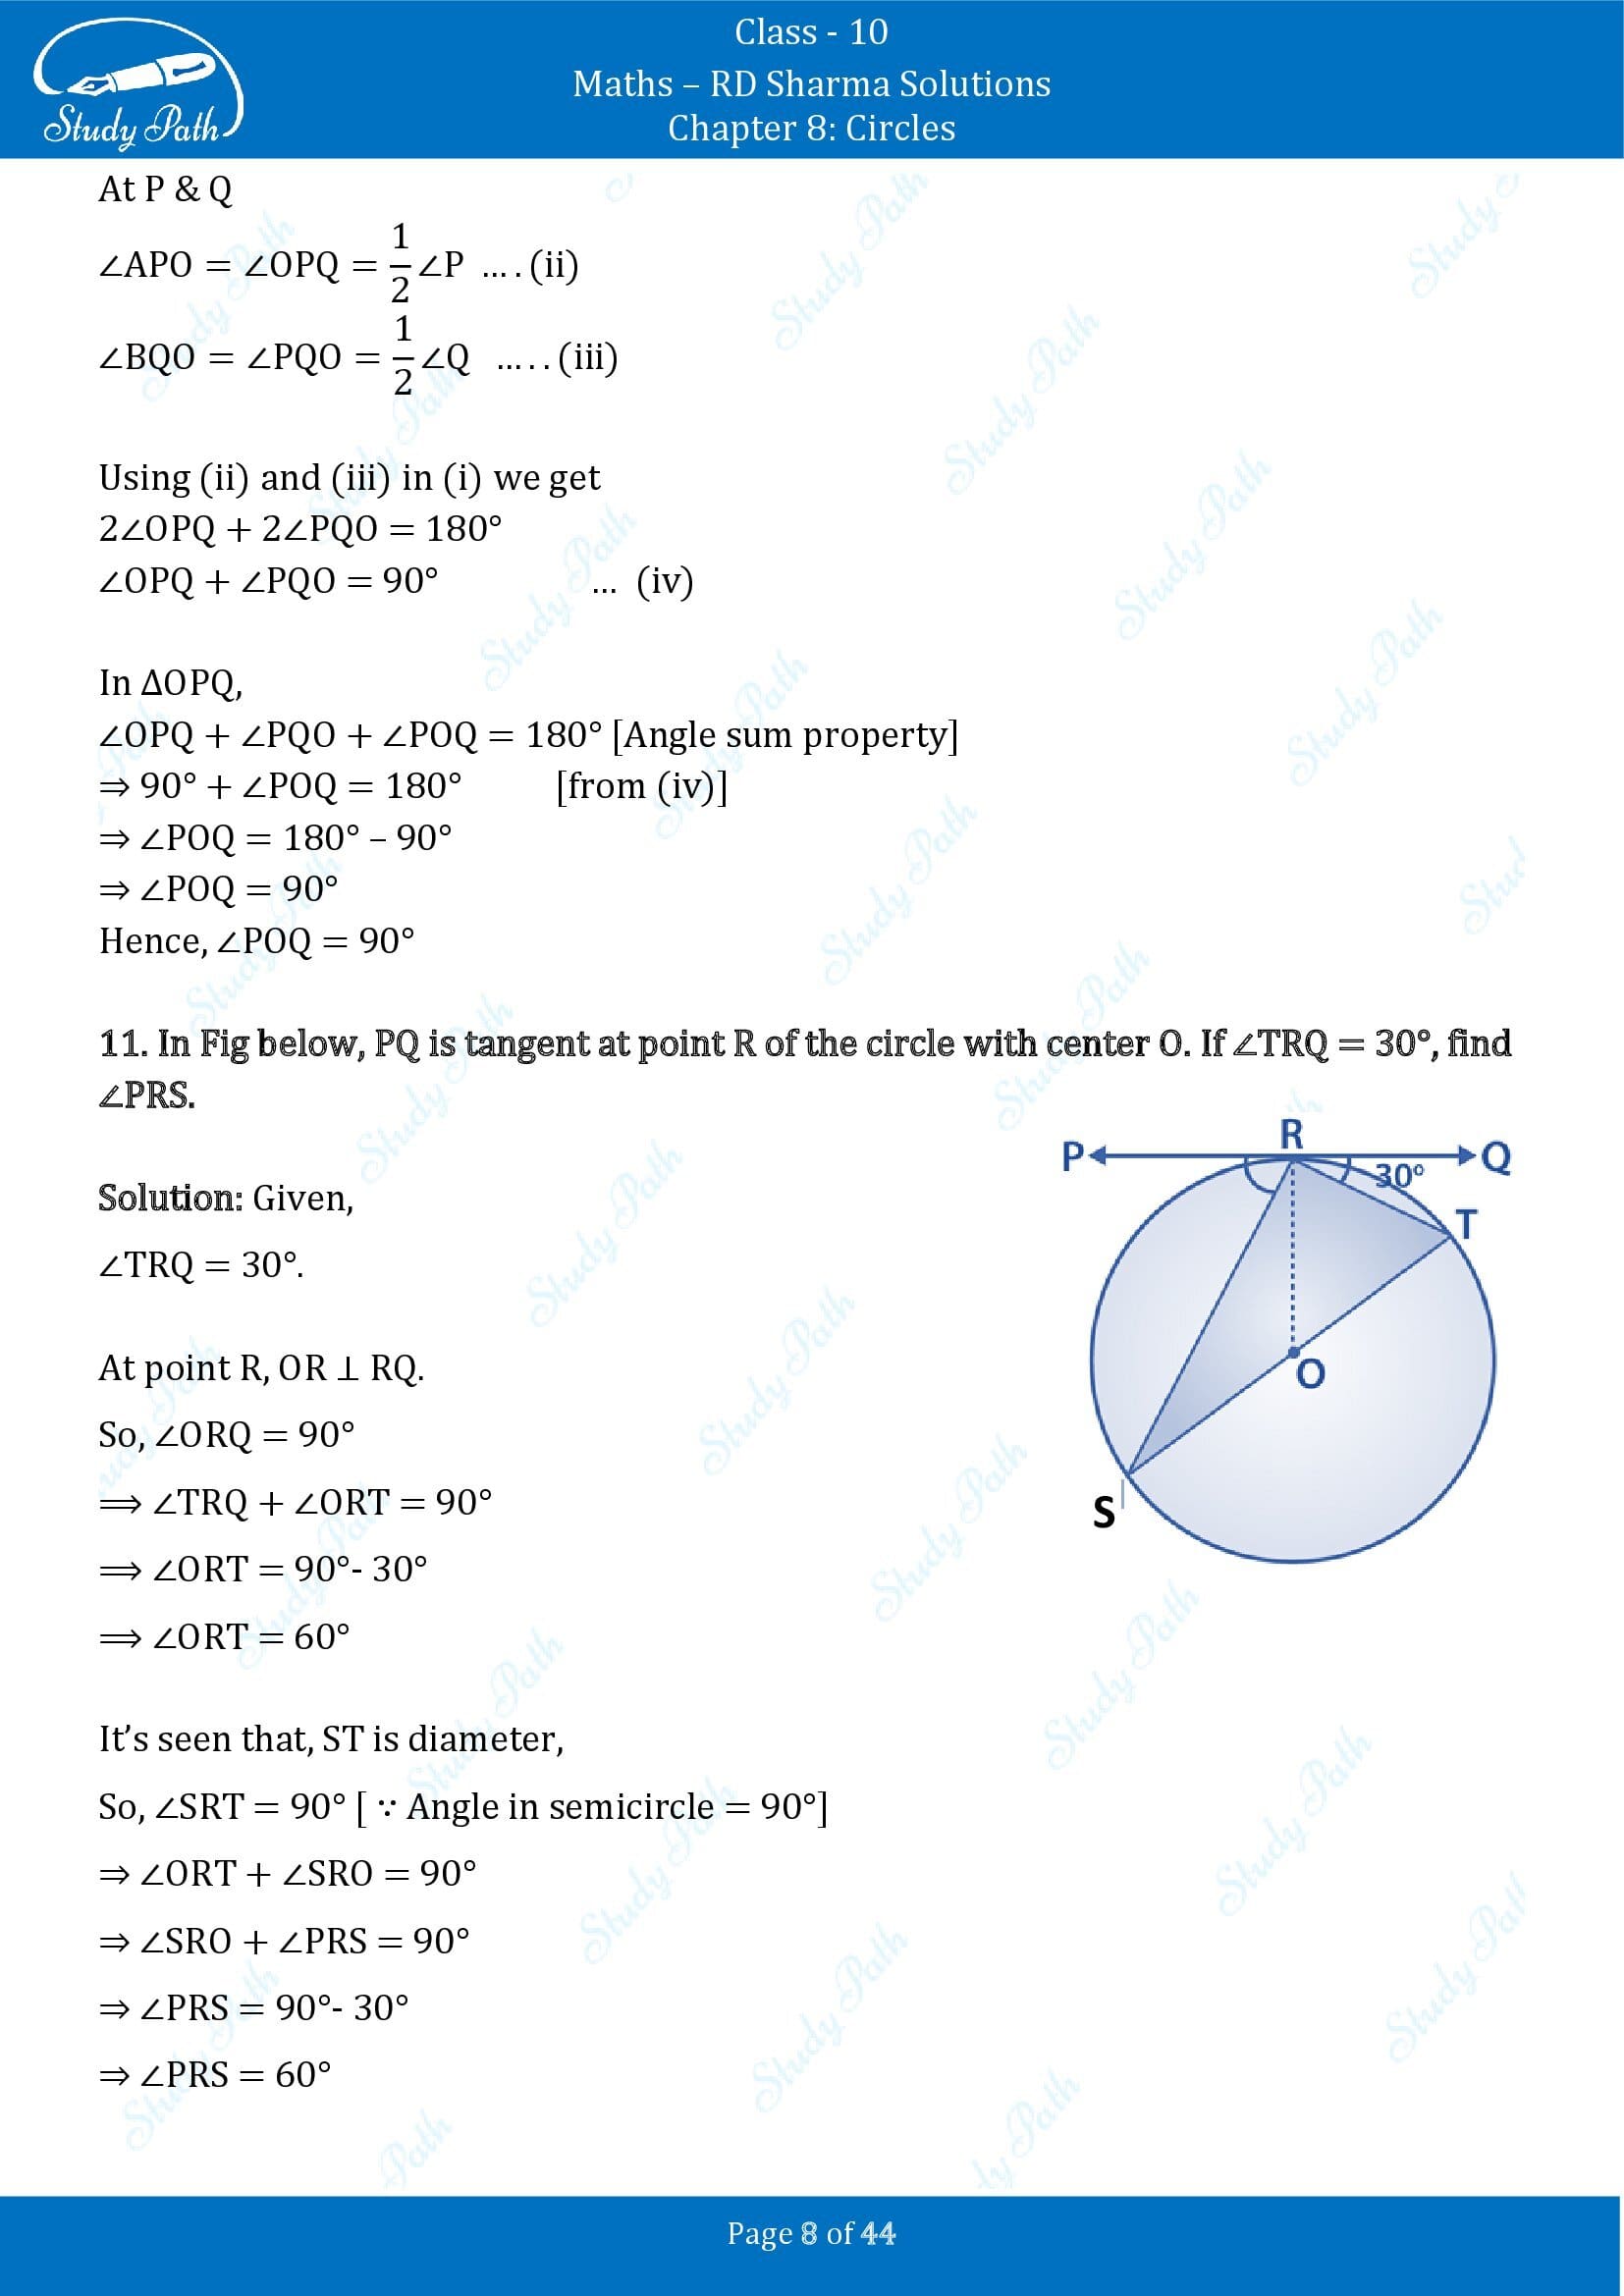 RD Sharma Solutions Class 10 Chapter 8 Circles Exercise 8.2 00008